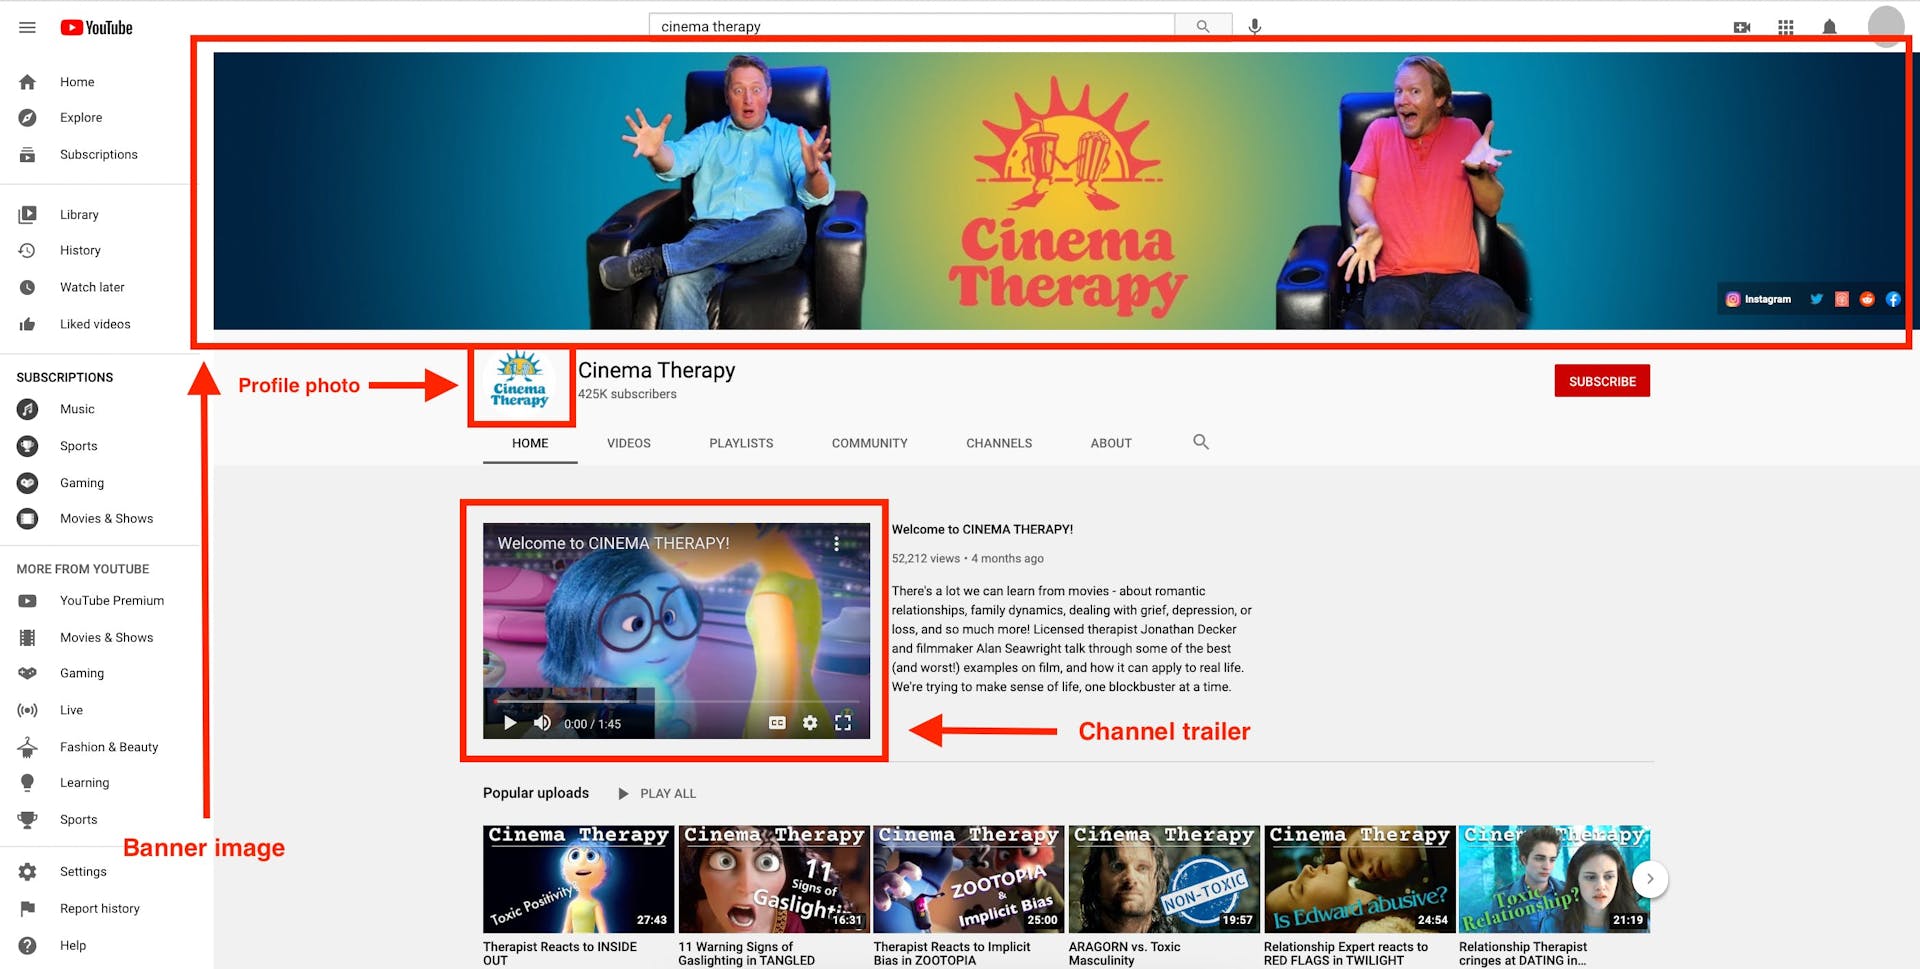 Example of a YouTube channel indicating locations for channel banner at the top, profile photo, and channel trailer